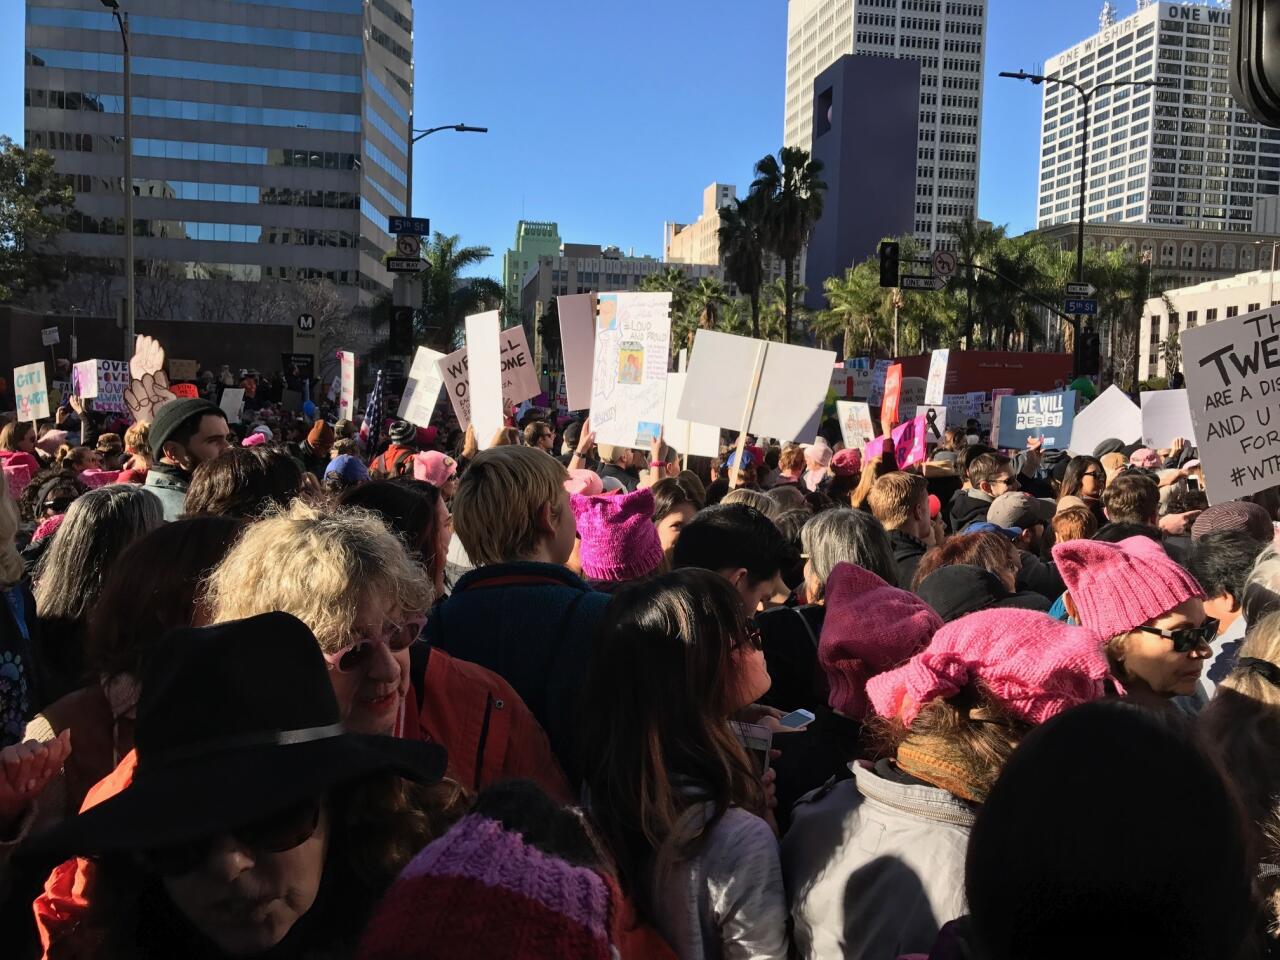 Marching for women's rights